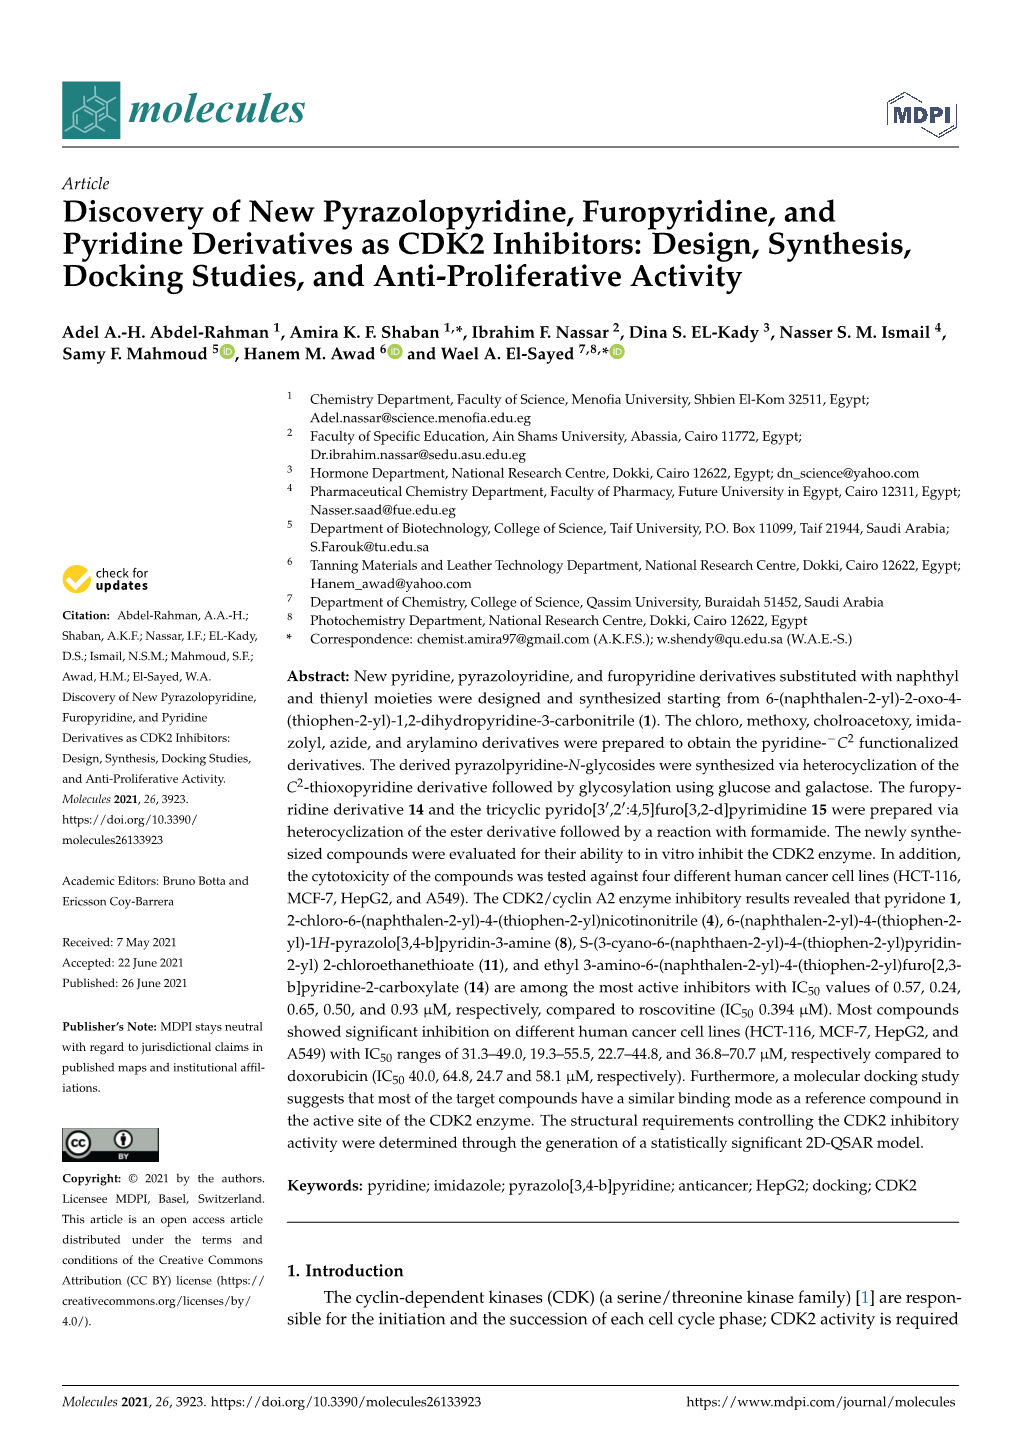 Discovery of New Pyrazolopyridine, Furopyridine, and Pyridine Derivatives As CDK2 Inhibitors: Design, Synthesis, Docking Studies, and Anti-Proliferative Activity